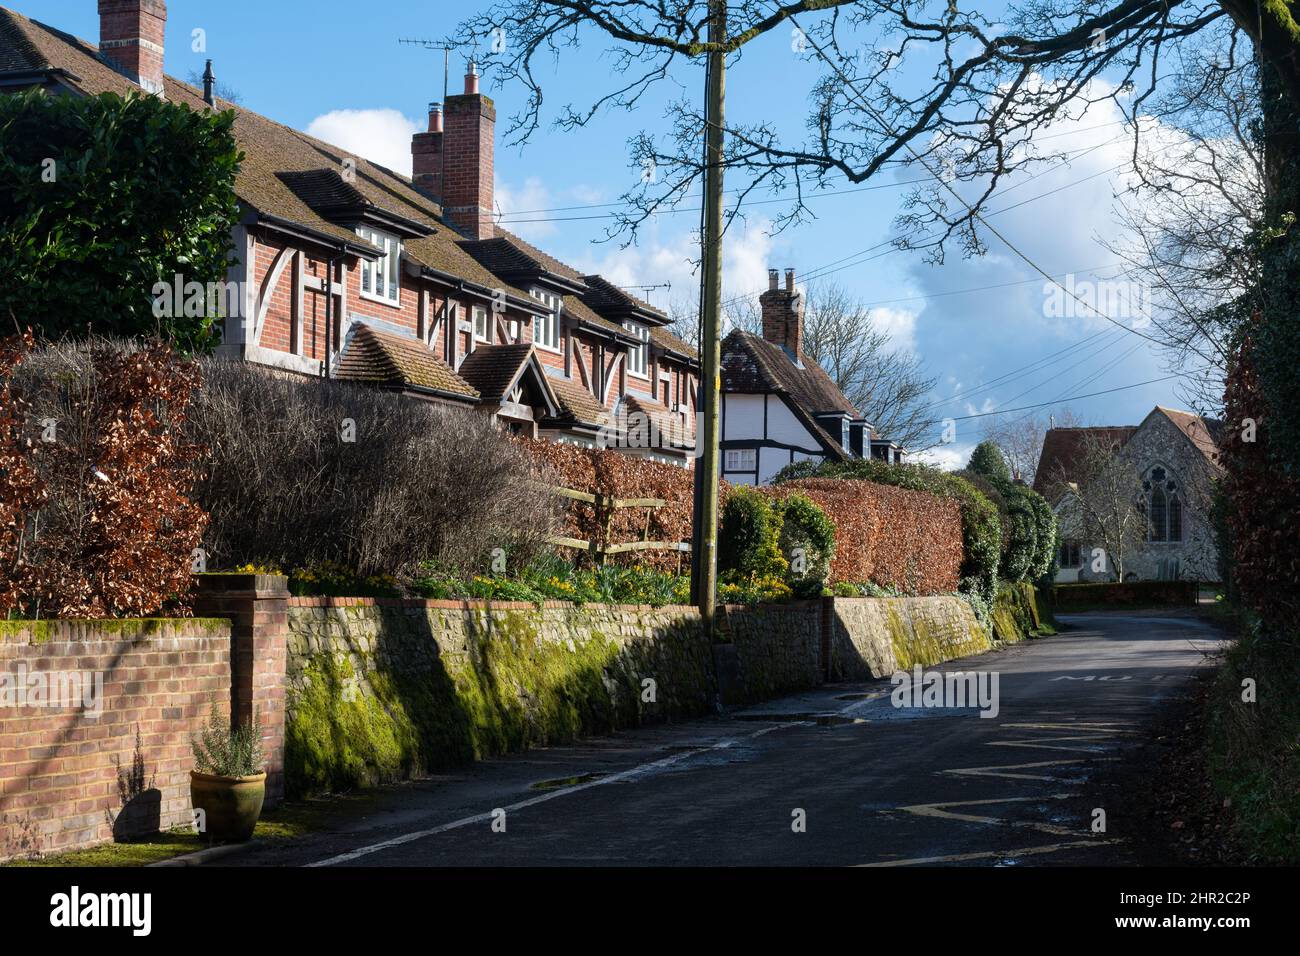 Cottages houses in Binsted village, Hampshire, England, UK Stock Photo